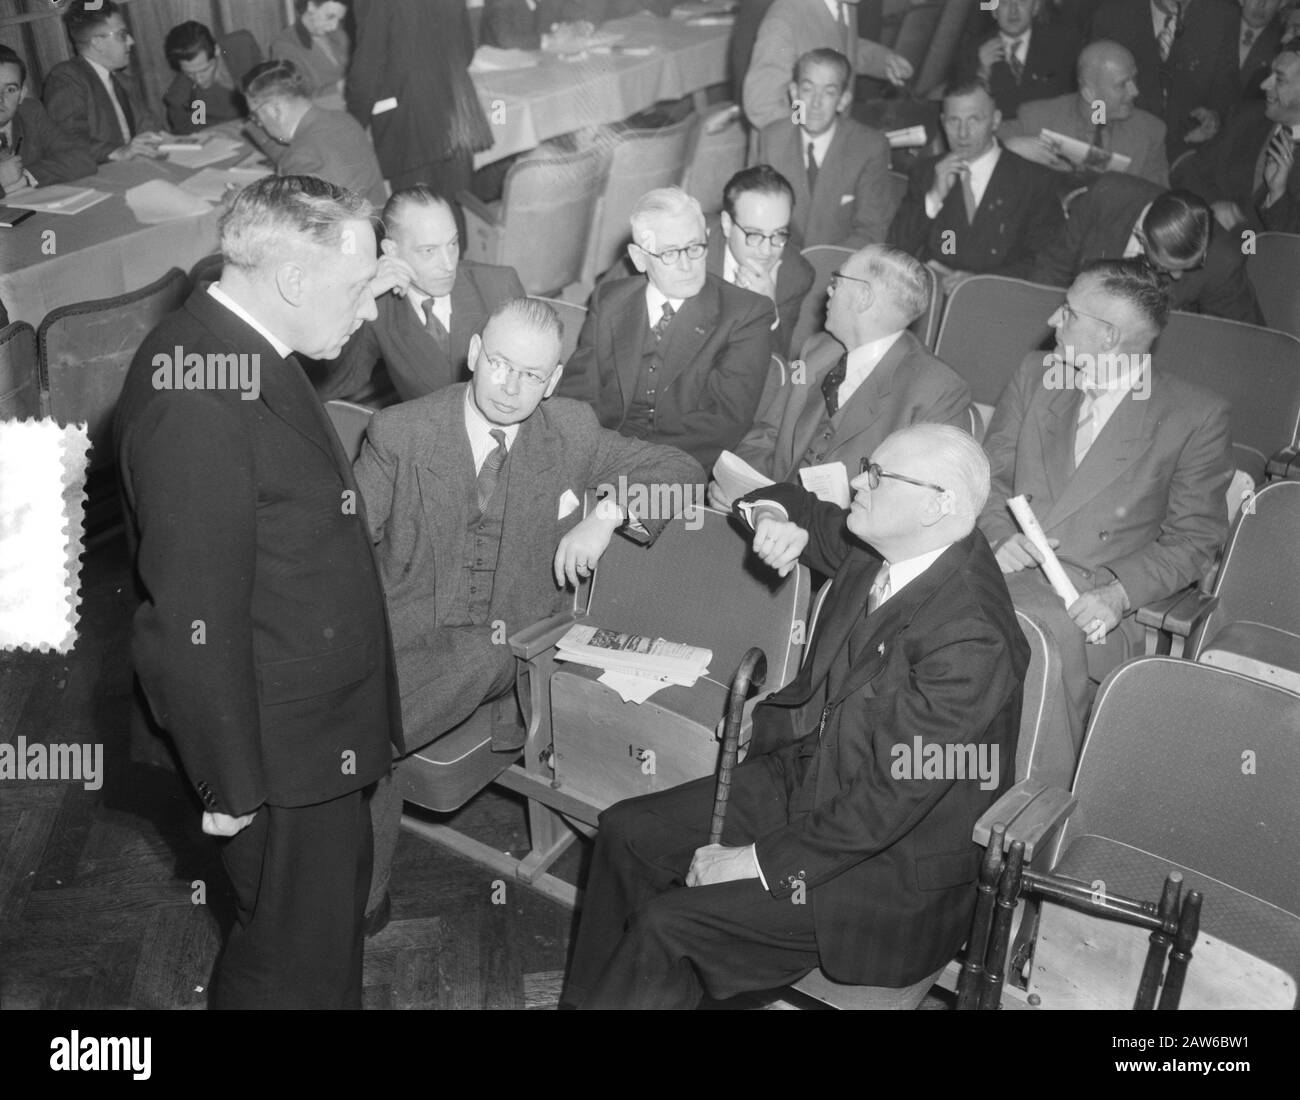 Wage Congress of the Catholic Workers' Movement (KAB) in Utrecht in building K & W. The chairman of the parliamentary group KVP, Prof. cpm.. Romme with injured foot was among the invitees. Standing for Prof. Romme Dr. Olierook Date:.. October 13, 1953 Location: Utrecht Keywords: congresses, trade unions, unions Person Name: Kab, Romme Stock Photo